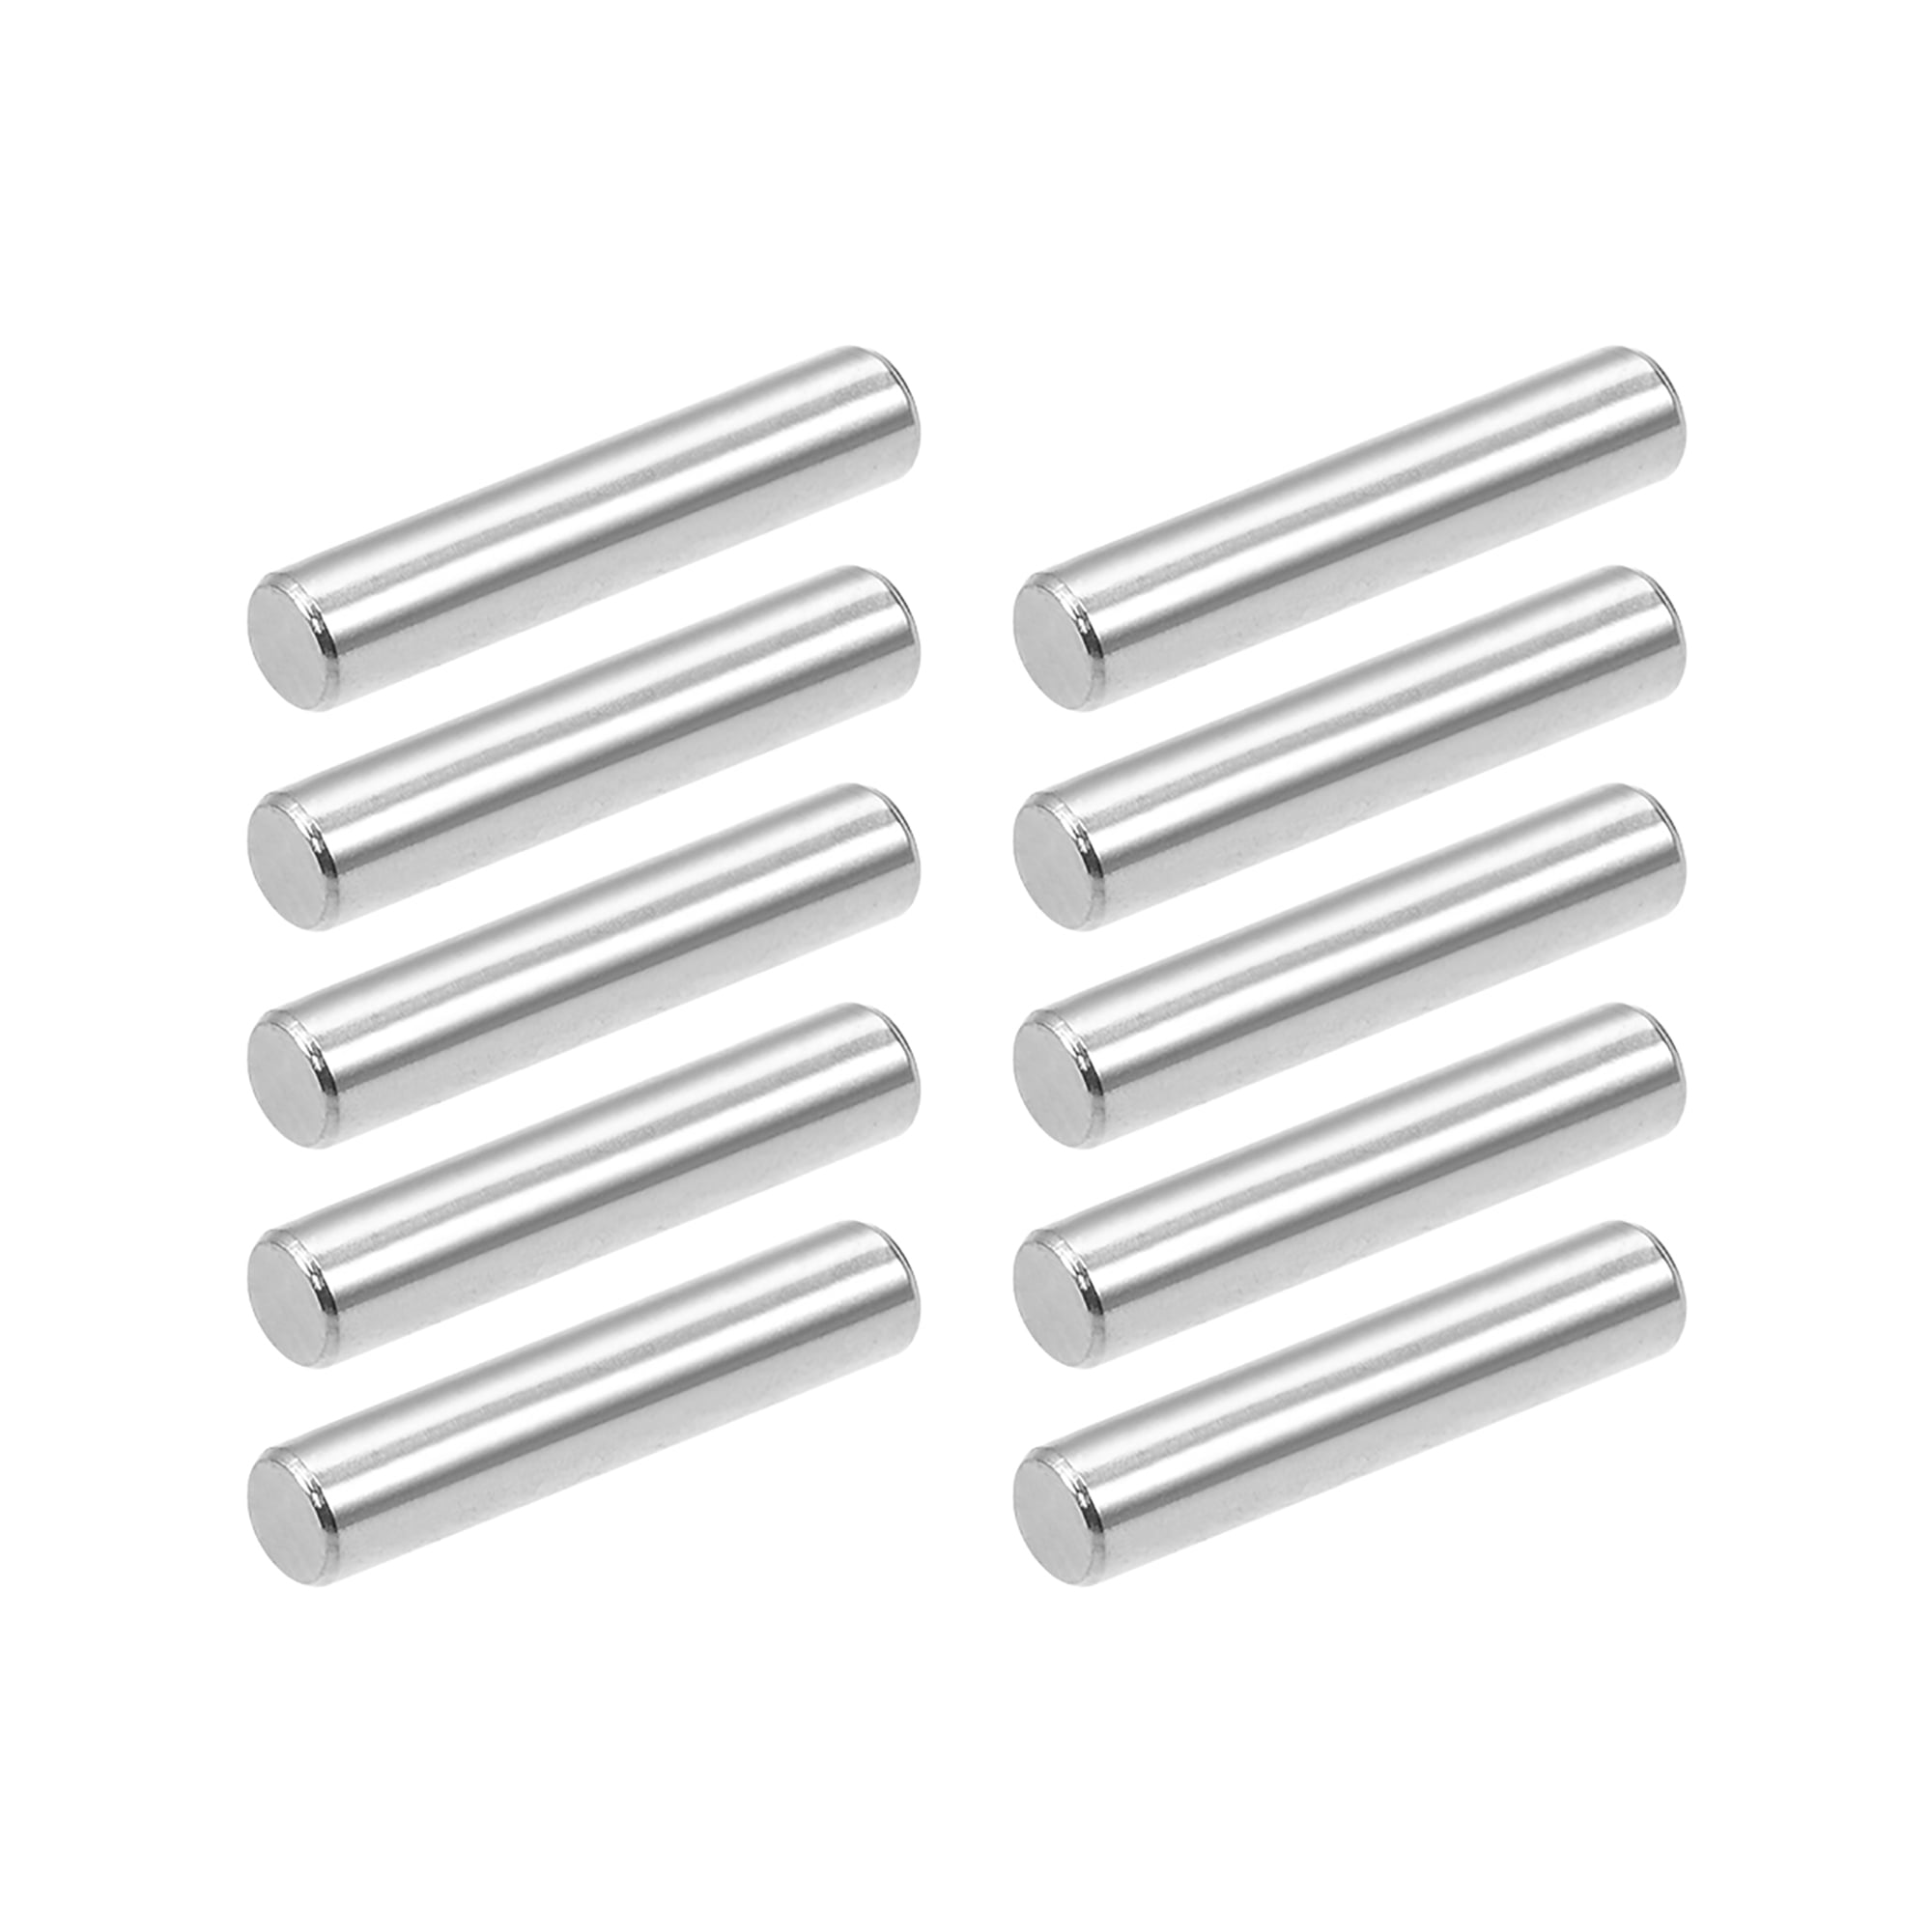 100 Pcs Stainless Steel 3.5mm x 15.8mm Dowel Pins  Silver 